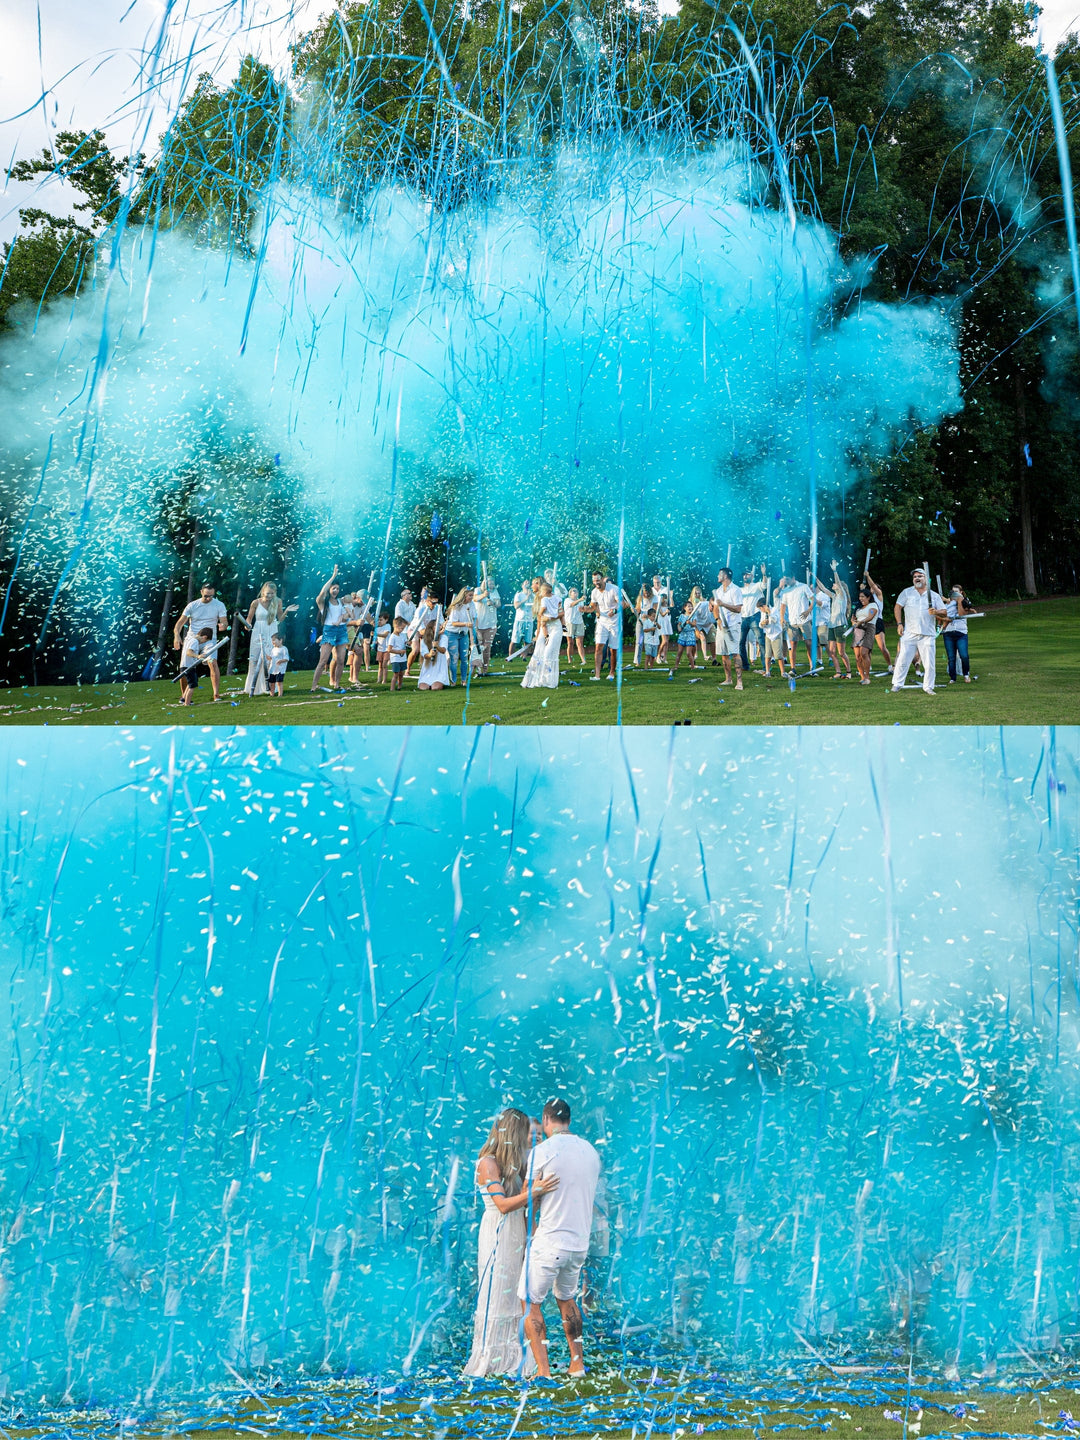 POOF THERE IT IS! Cannons Confetti + Powder + Streamers Gender Reveal Cannons